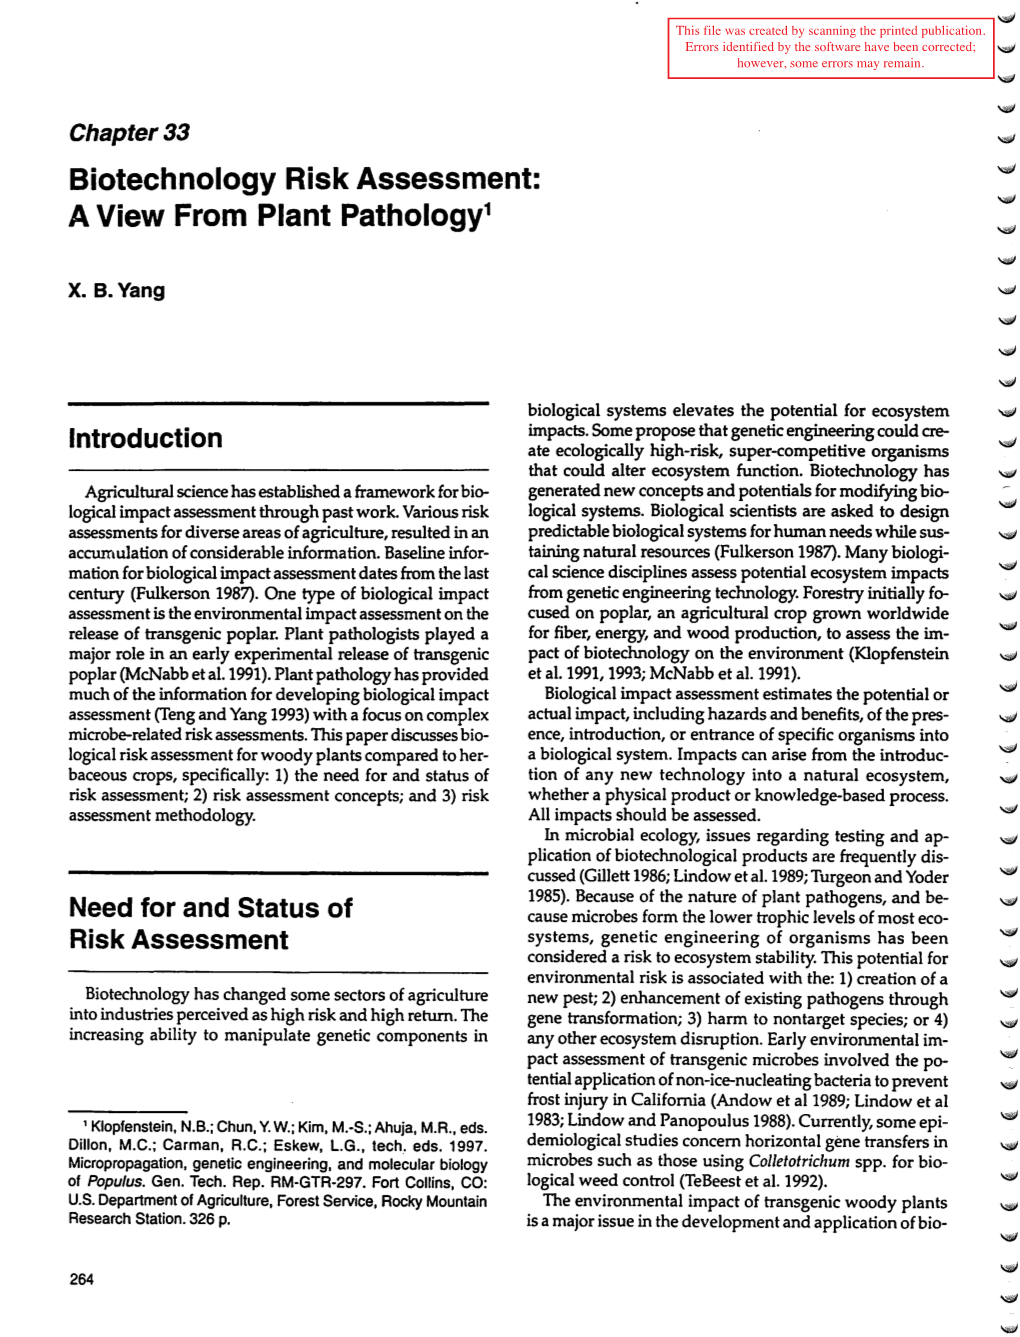 Biotechnology Risk Assessment: a View from Plant Pathology1